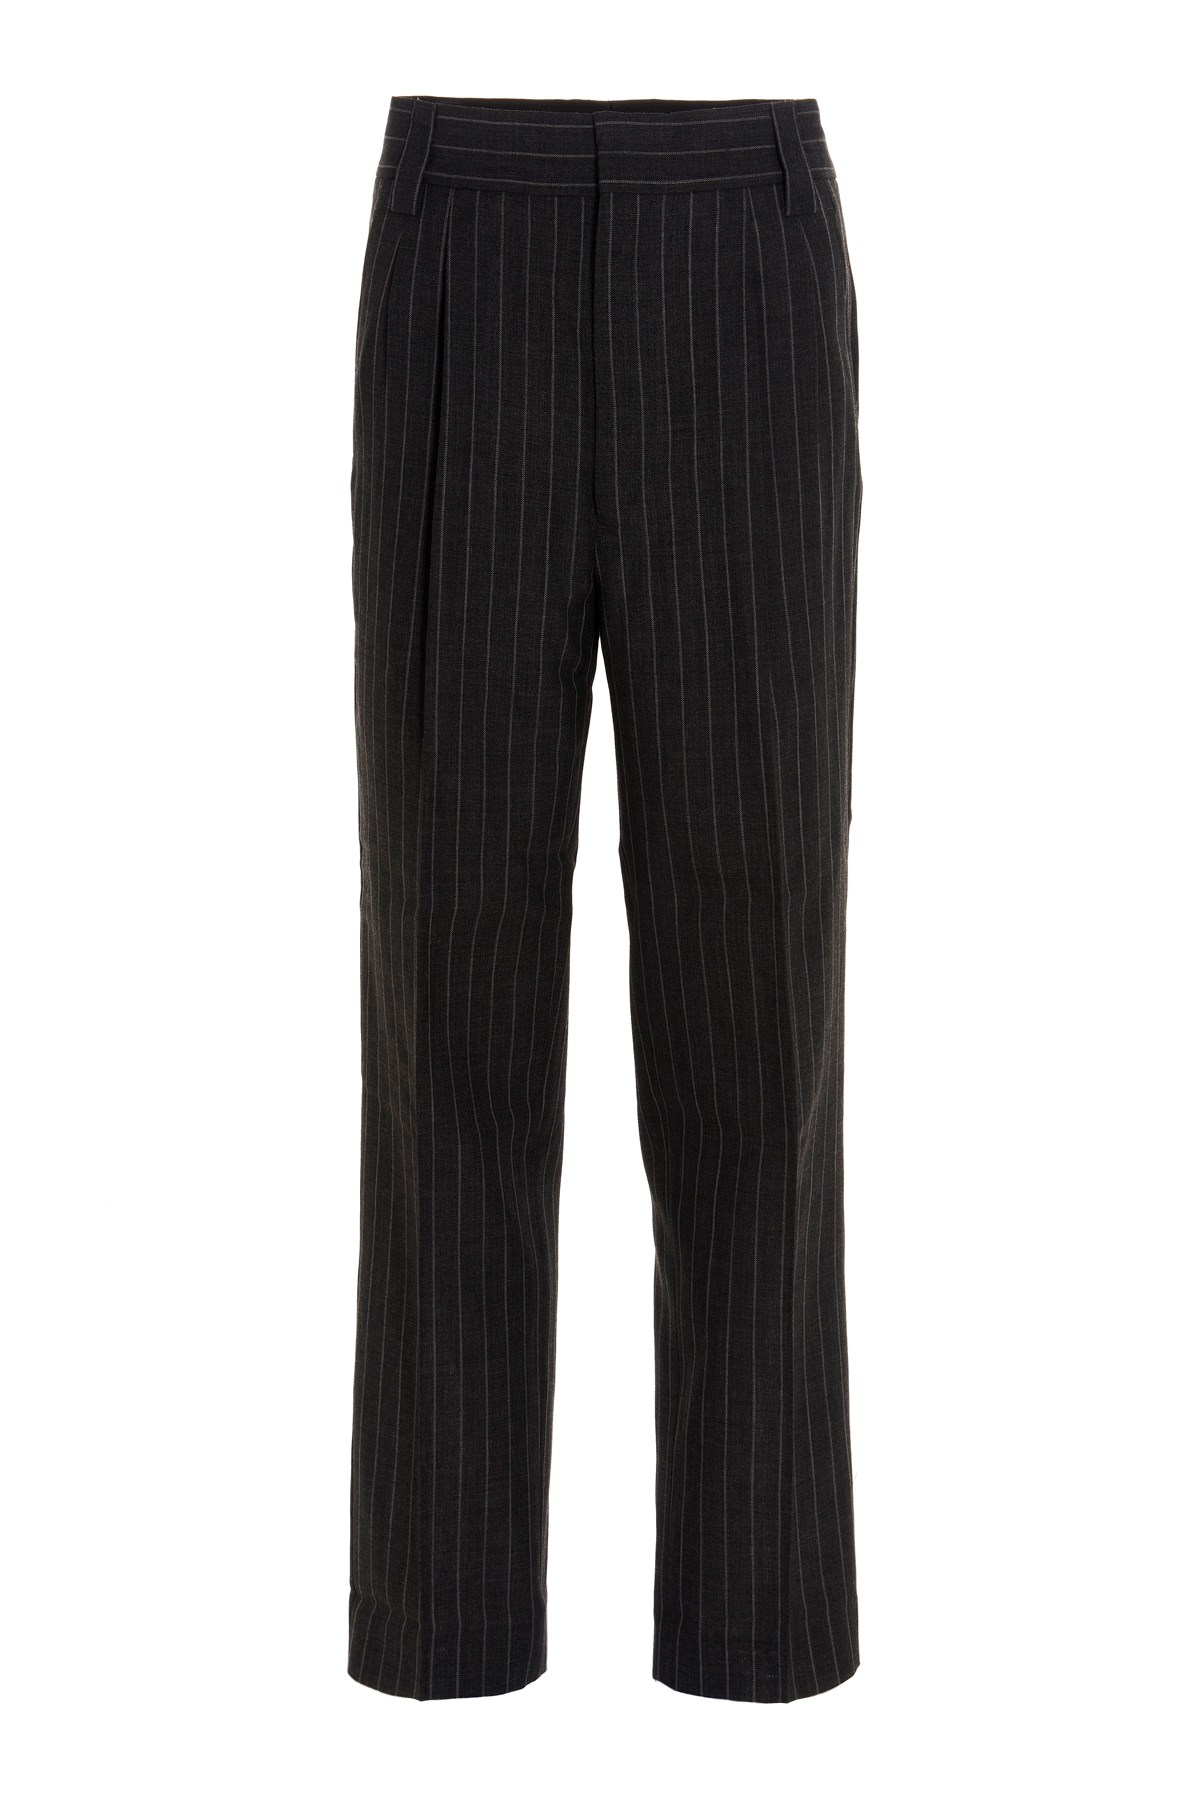 FEAR OF GOD Striped Trousers